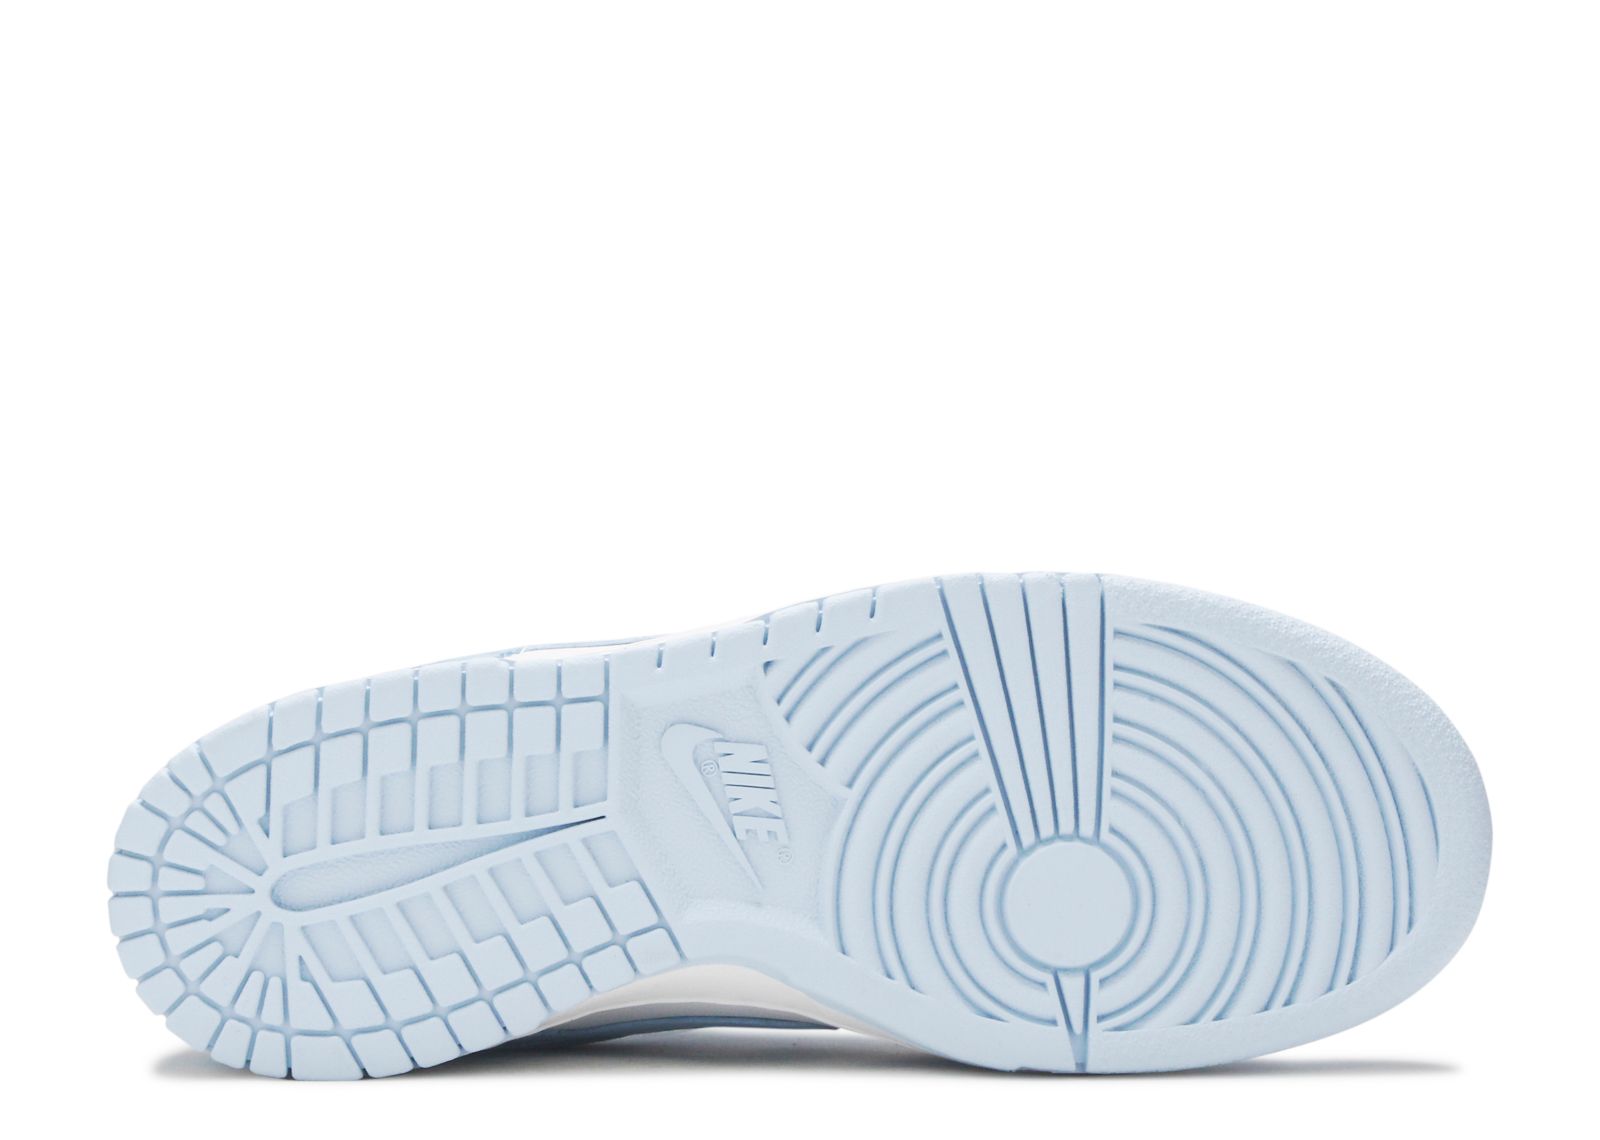 Wmns Dunk Low 'Ice Blue' - Nike - 314141 141 - white/ice blue 